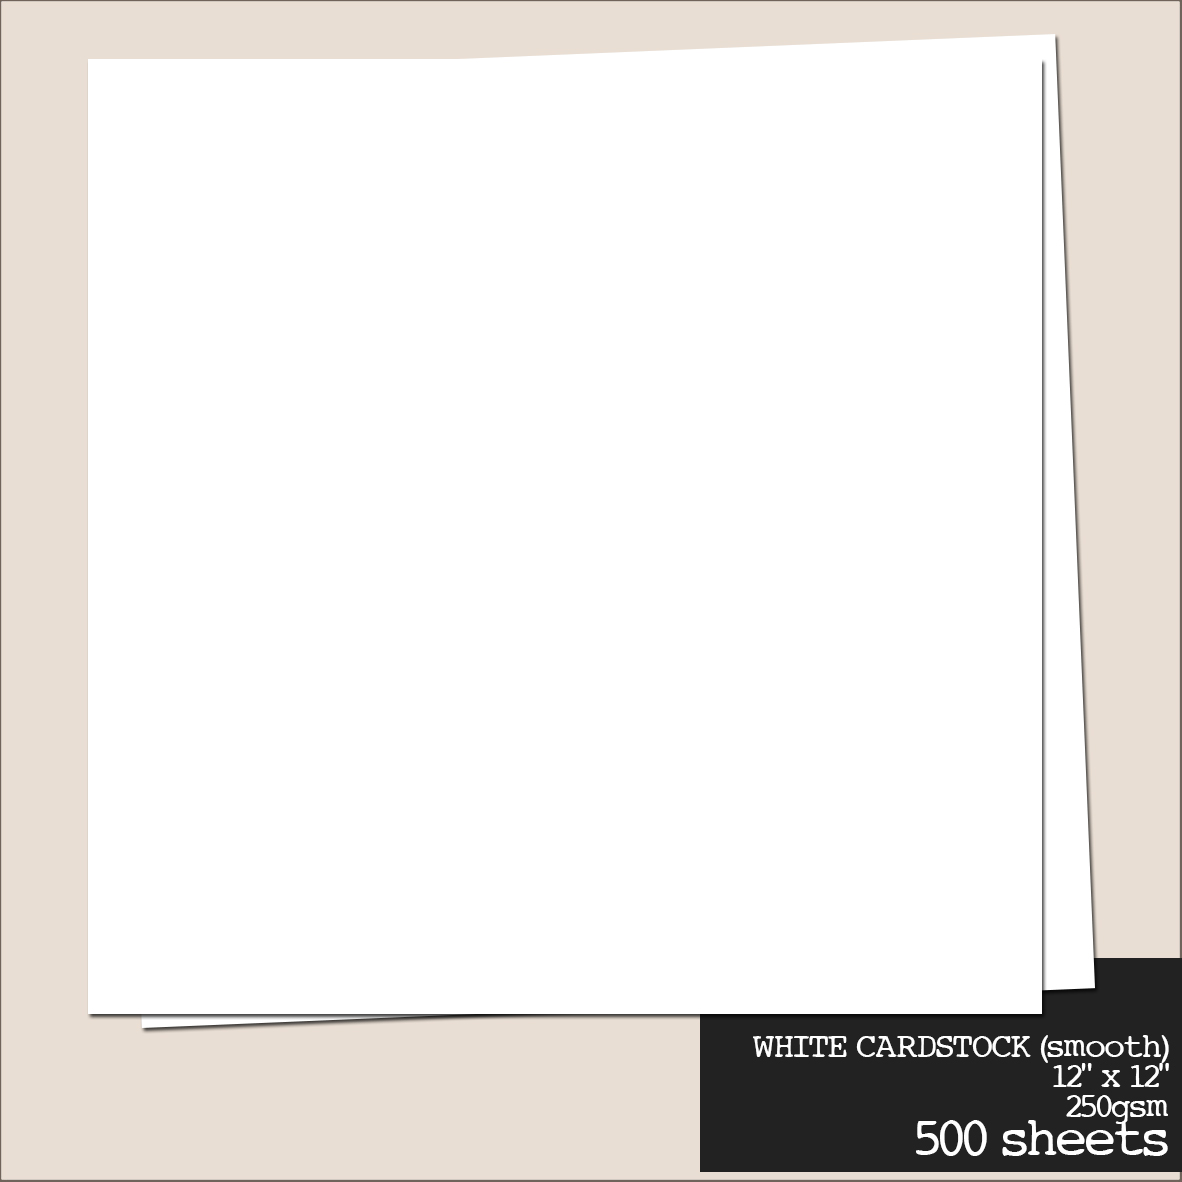 1/2 X 11 Cardstock Rounded Corners 80lb Cover White, 54% OFF